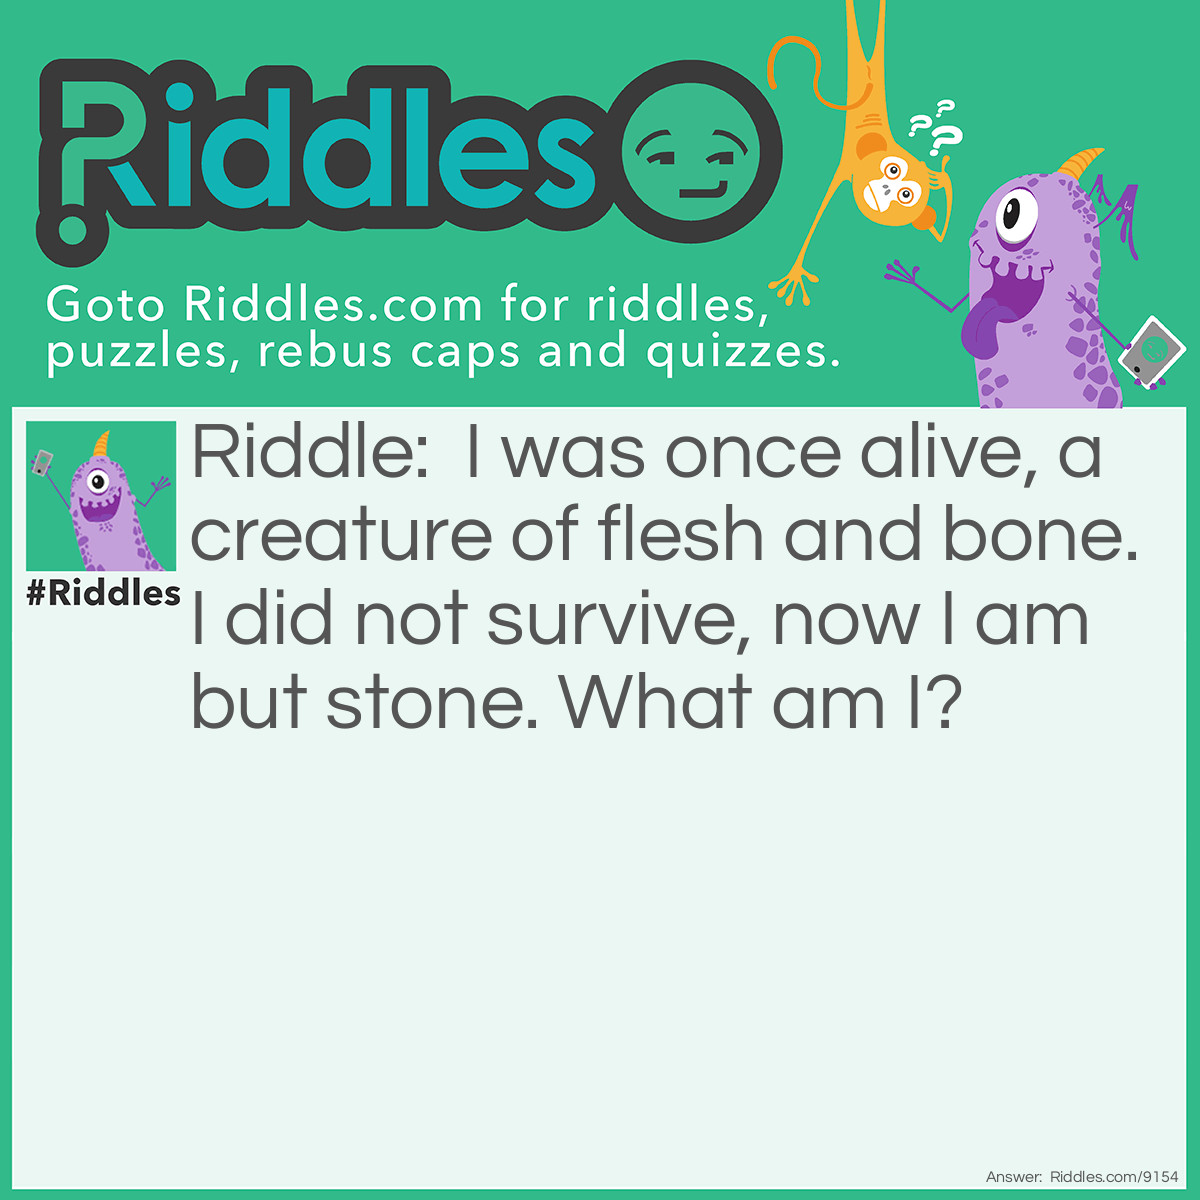 Riddle: I was once alive, a creature of flesh and bone. I did not survive, now I am but stone. What am I? Answer: A Fossil.